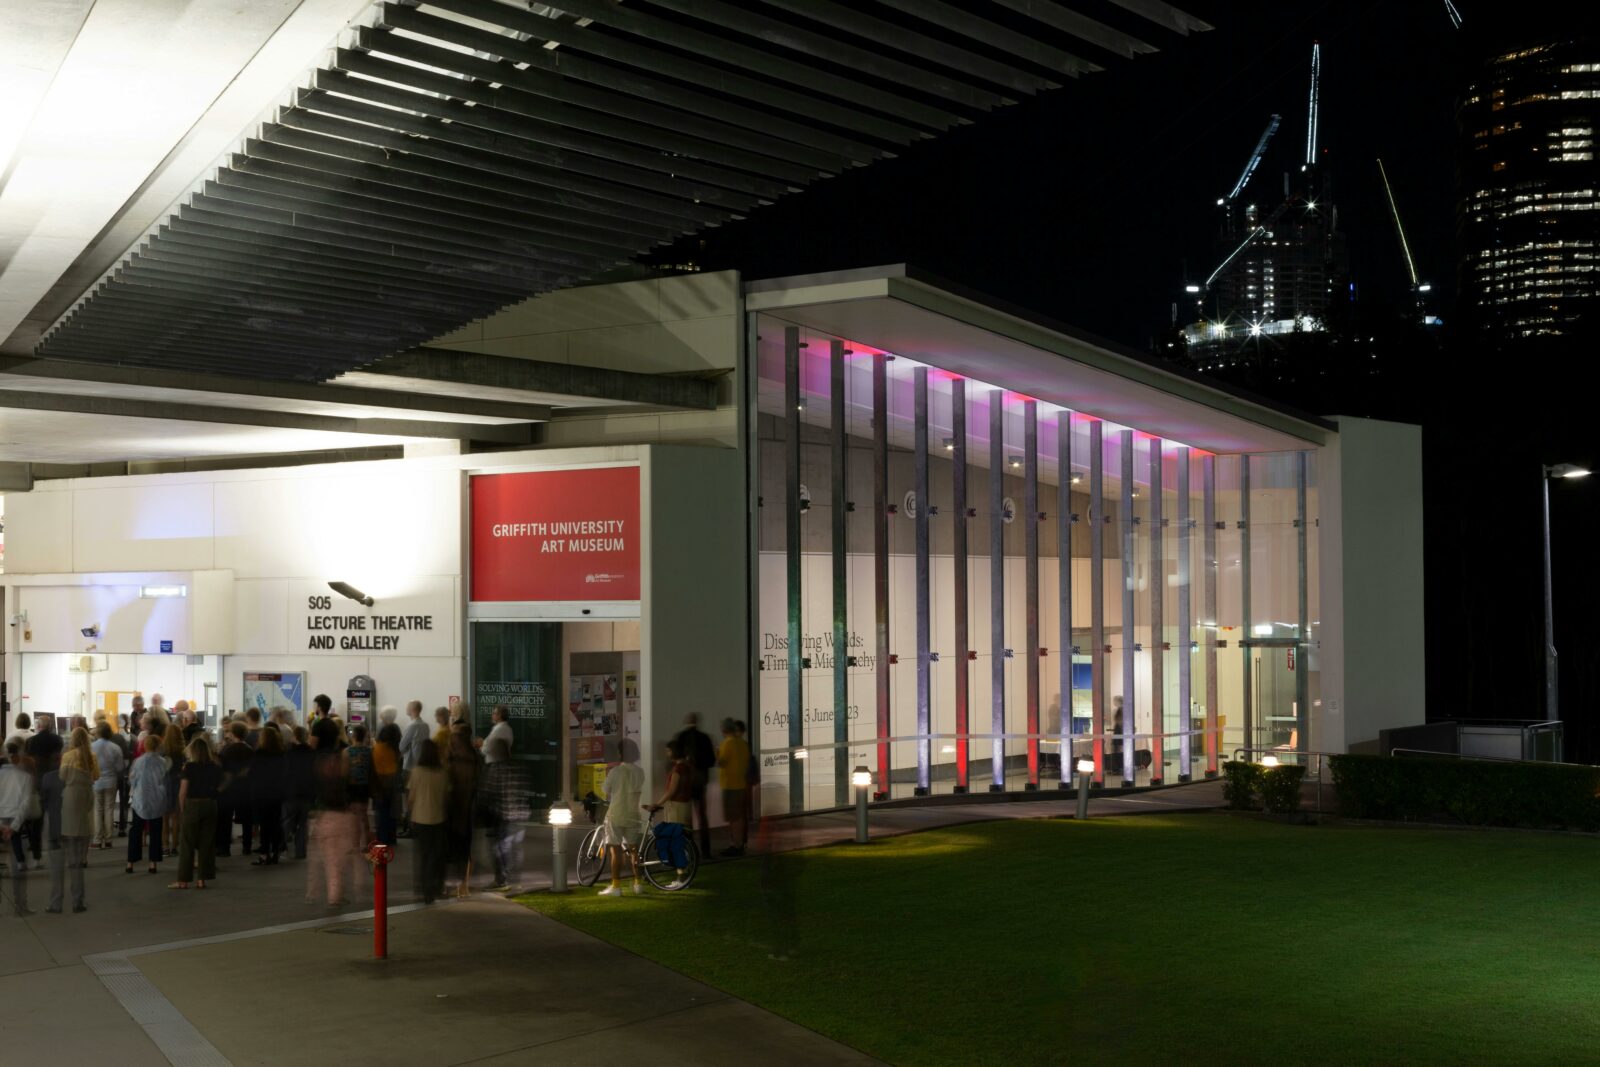 Exterior view of Griffith University Art Museum at nigh, with a large crowd